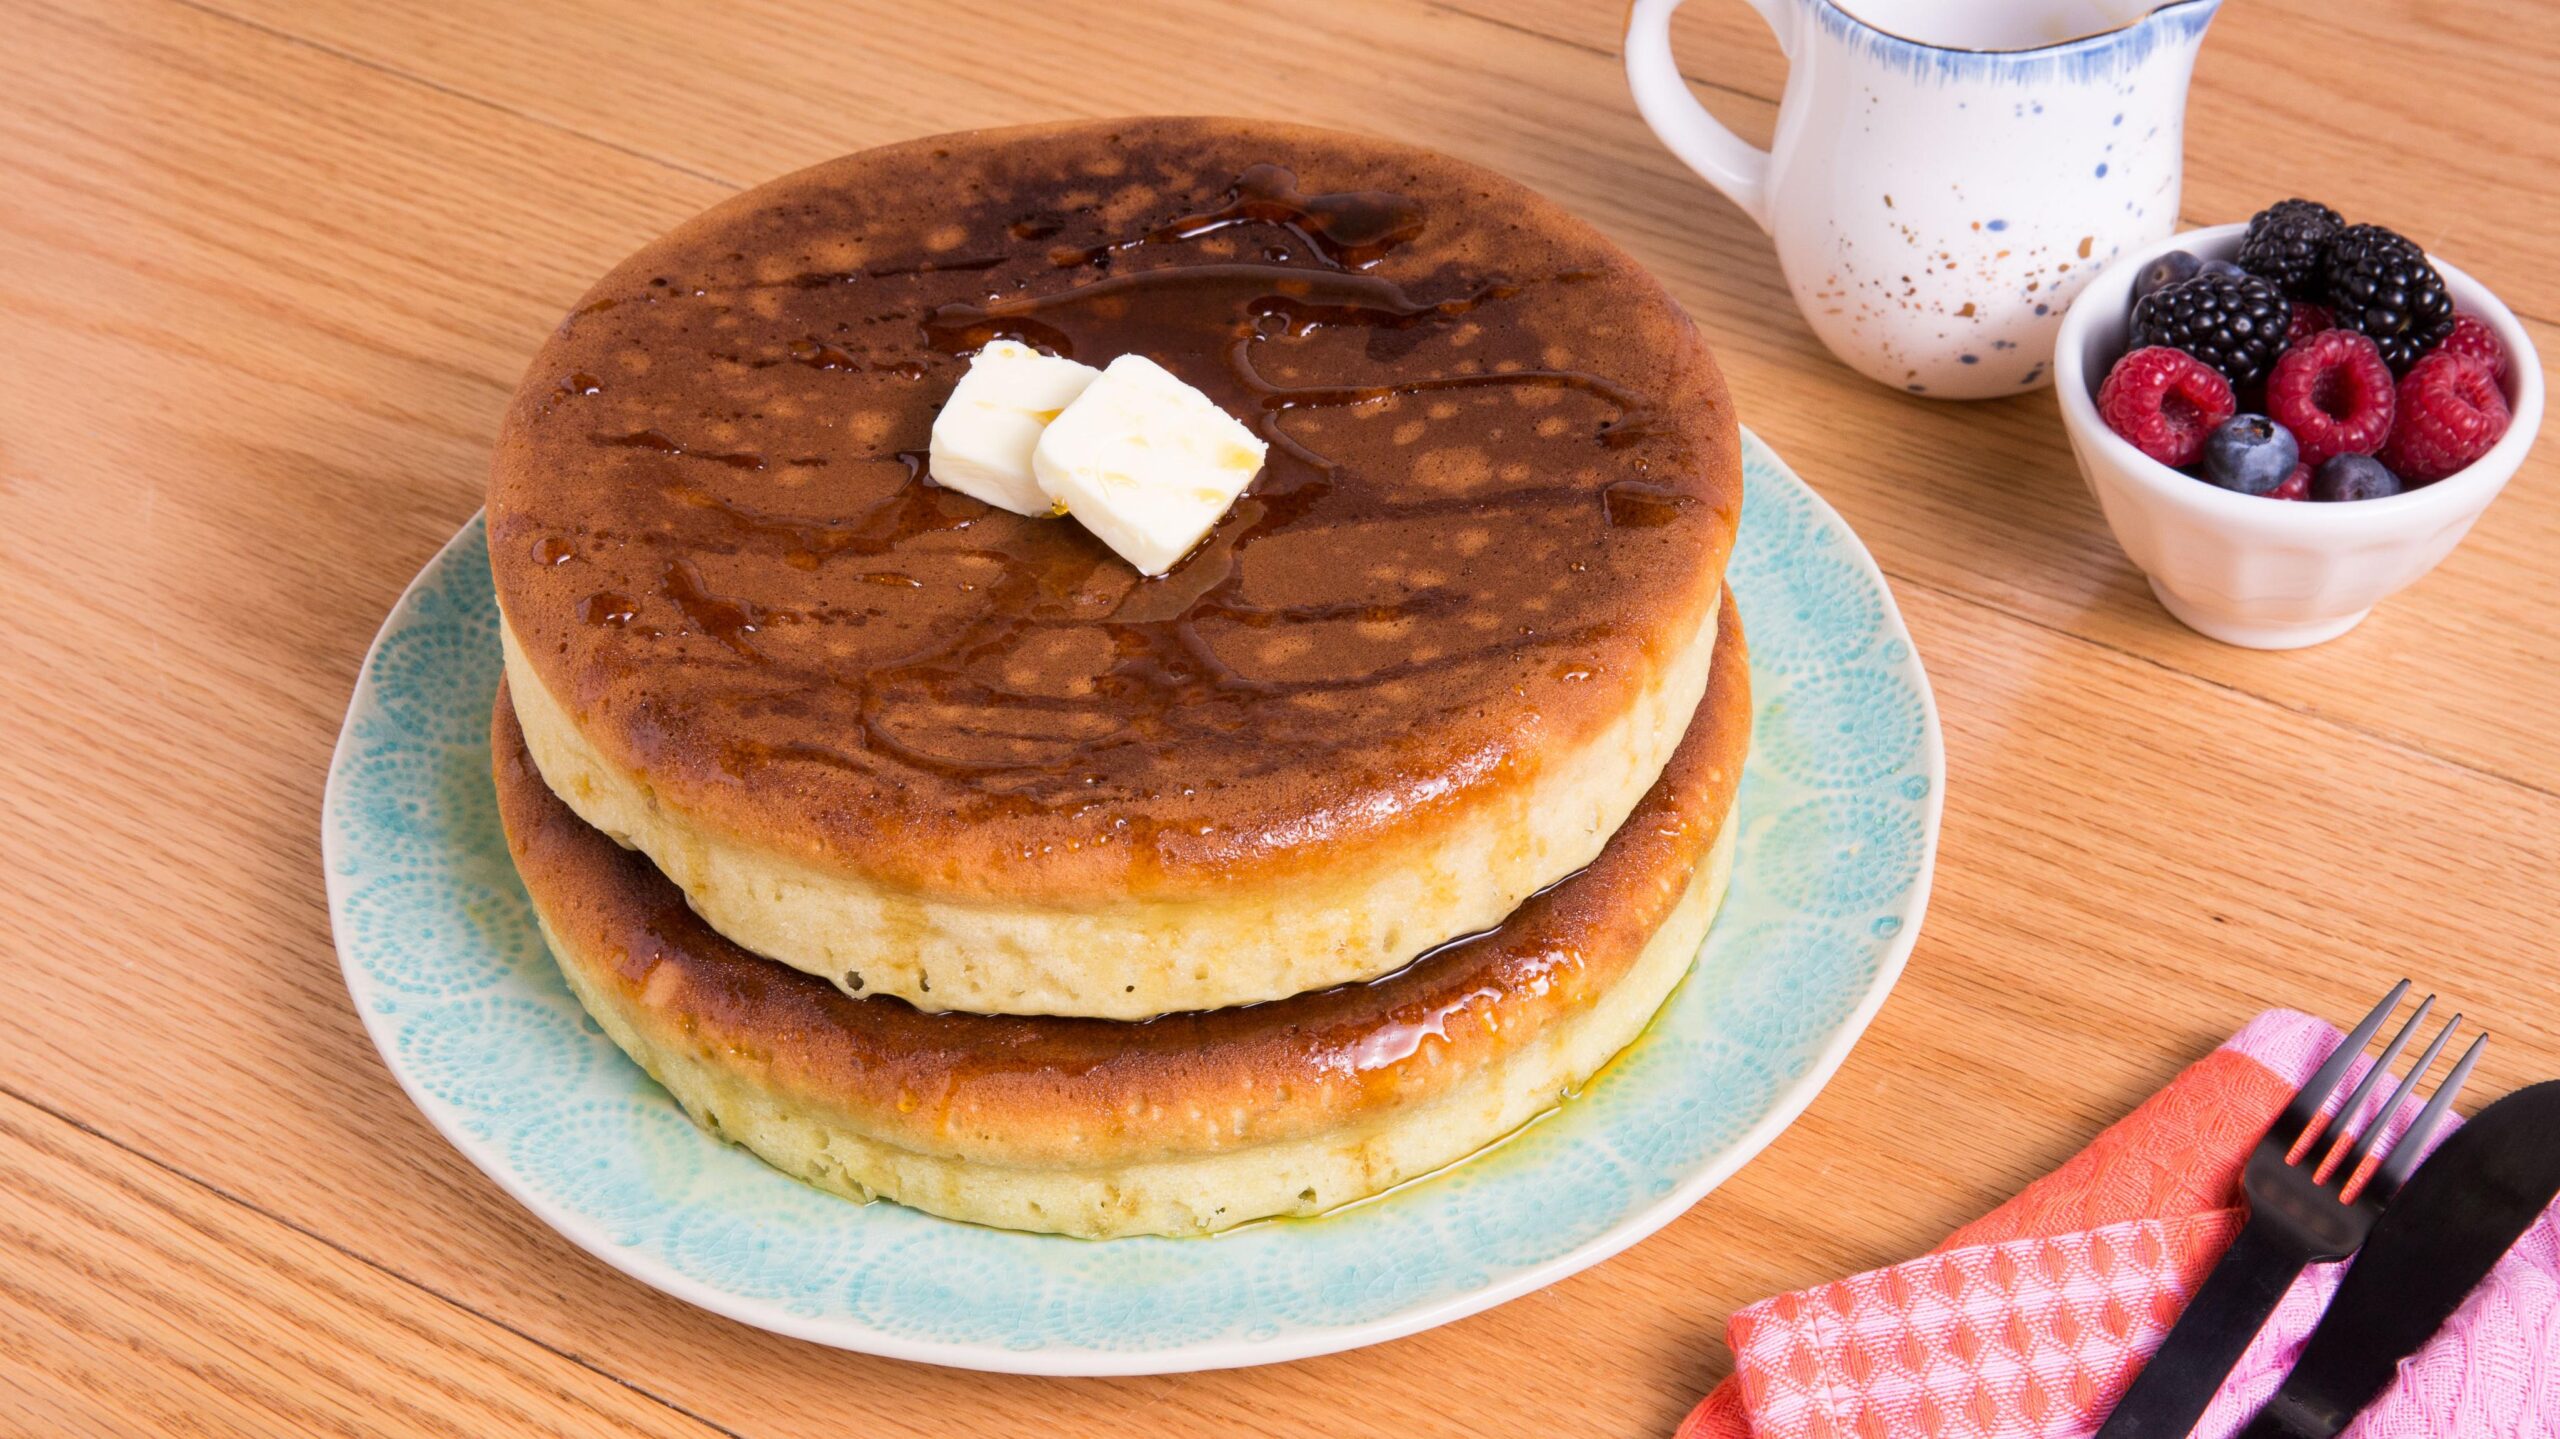 Sure, here are 11 unique photo captions for the Giant Instant Pot Pancakes recipe: